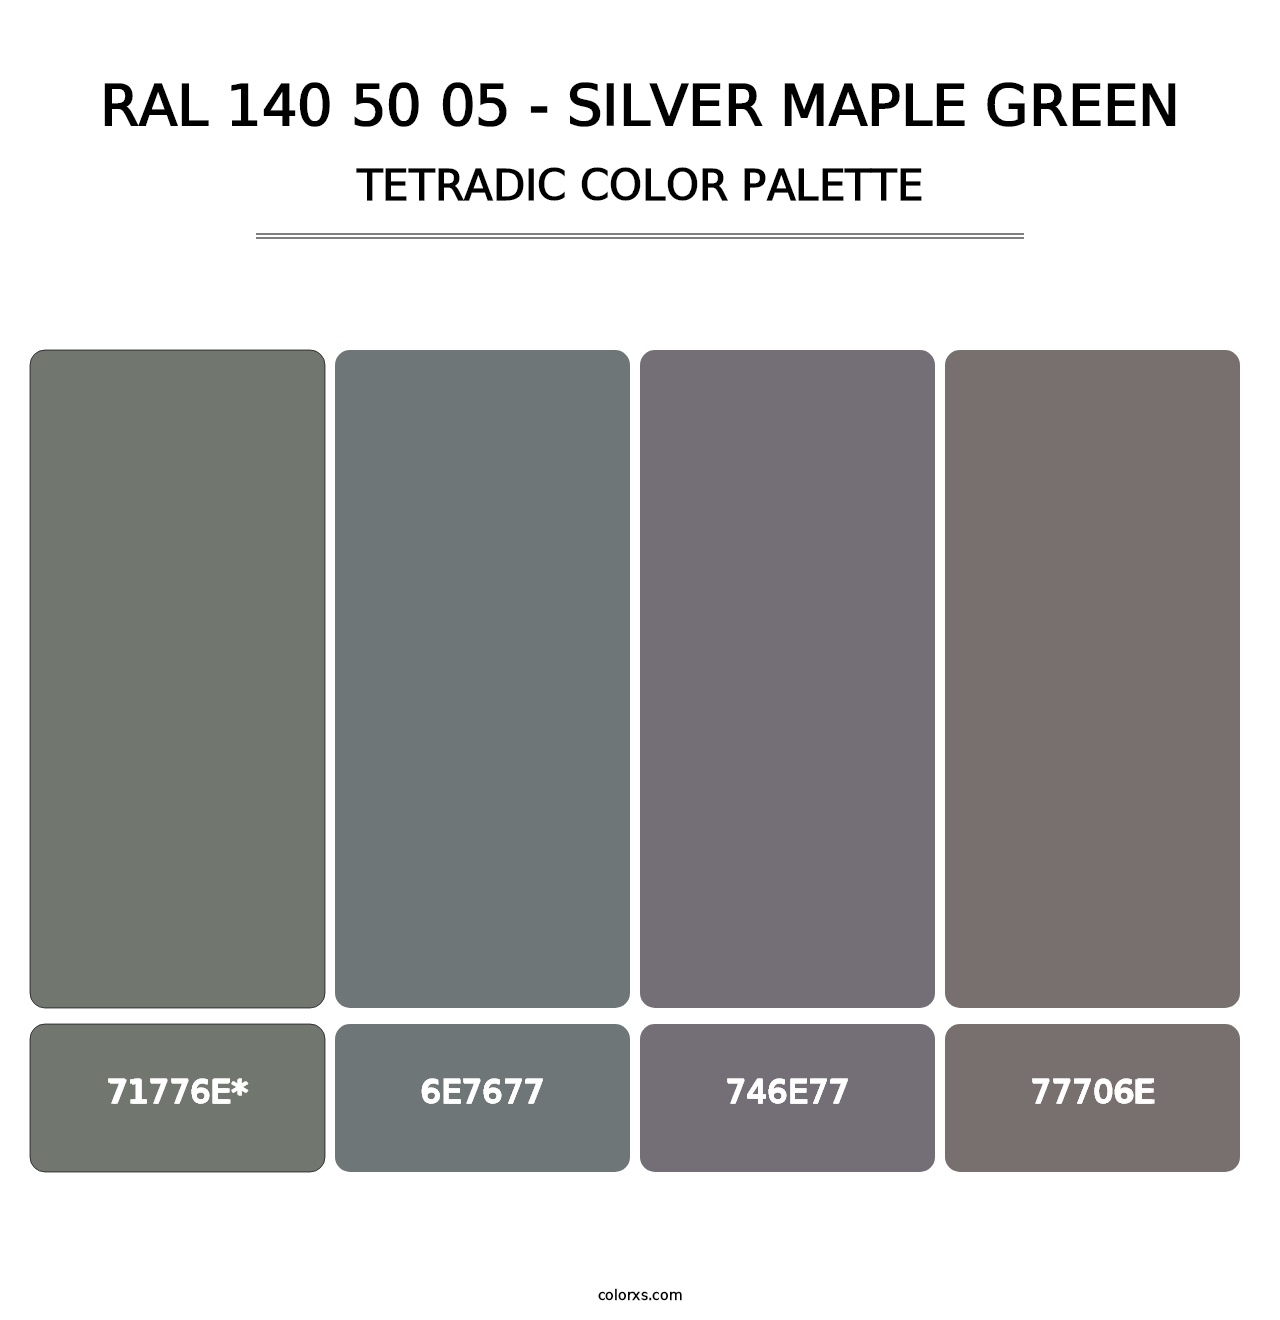 RAL 140 50 05 - Silver Maple Green - Tetradic Color Palette